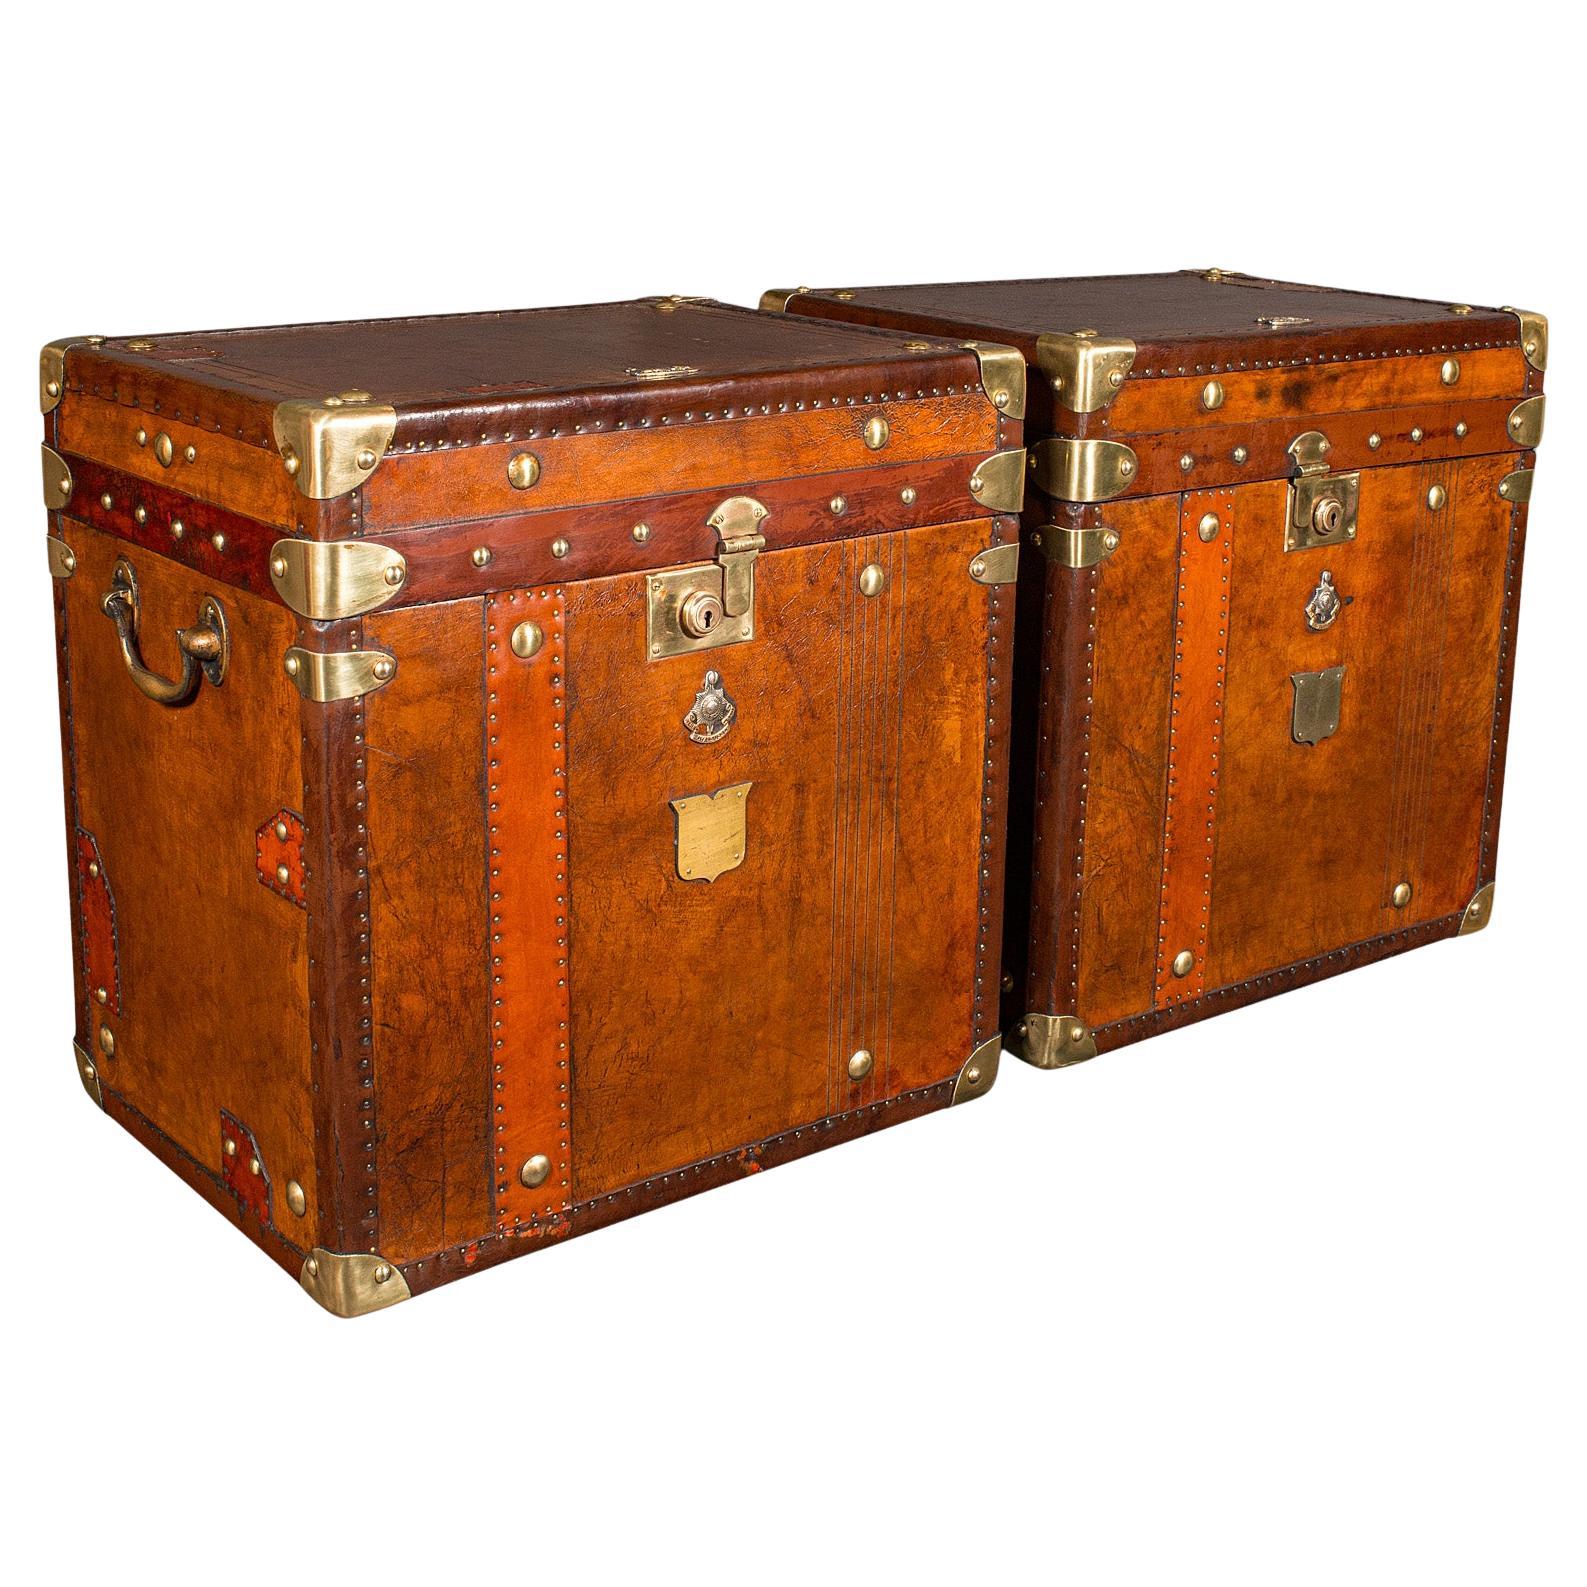 Pair Of Vintage Officer's Campaign Luggage, English, Leather Cases, Nightstand